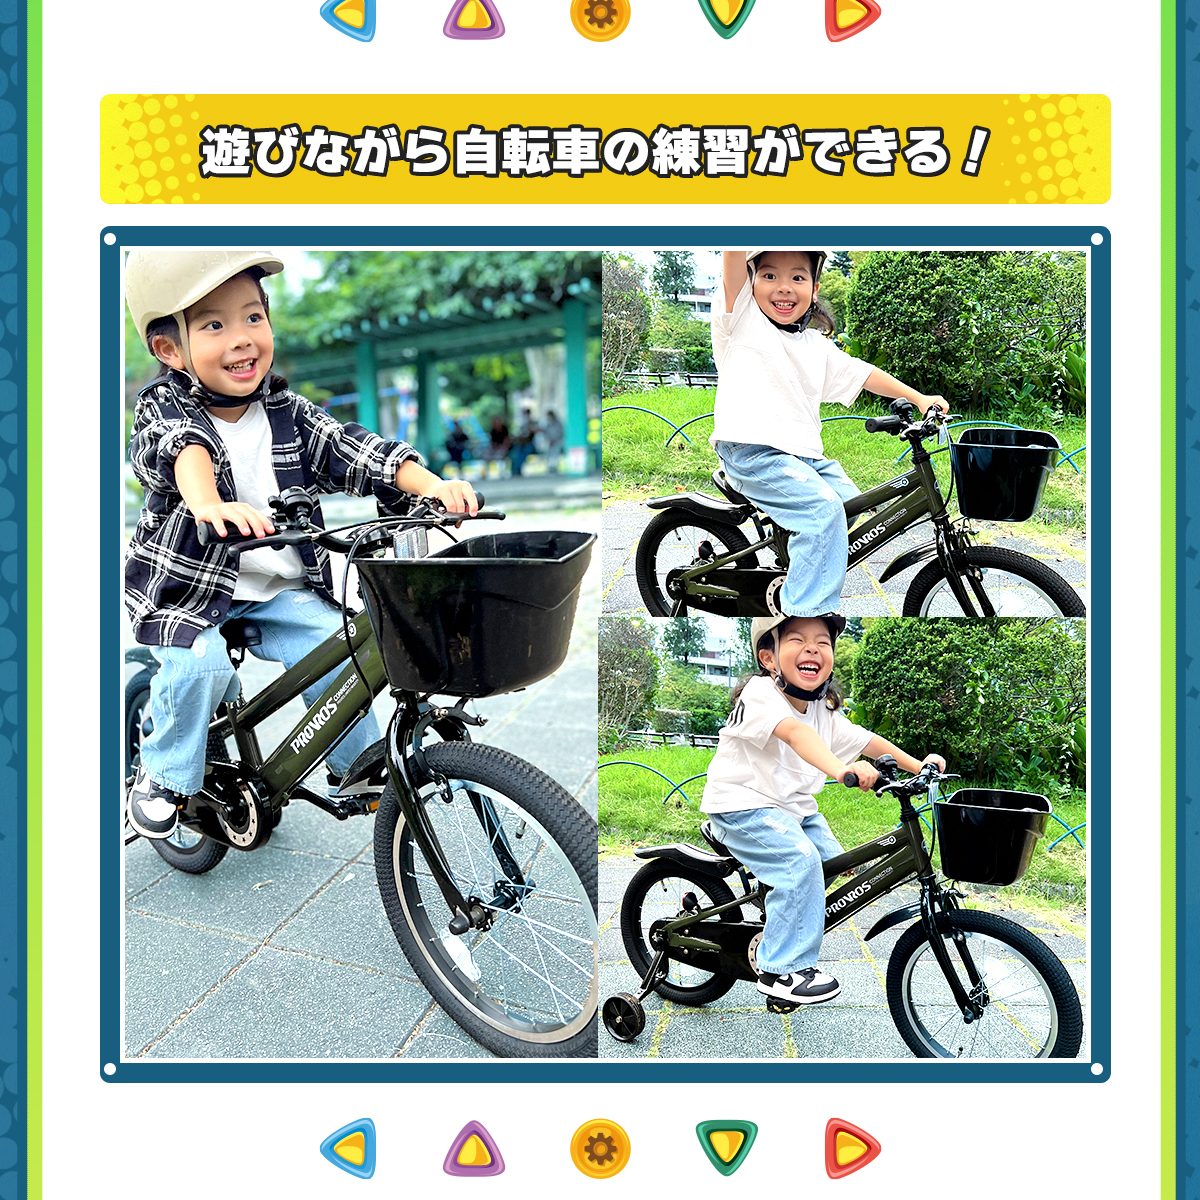 PROVROS 子供用自転車 補助輪付き 16インチ キッズ 幼児 4歳 5歳 6歳 カゴ ギフト 男の子 お祝い 誕生日 クリスマス PKM-16｜procycle｜13